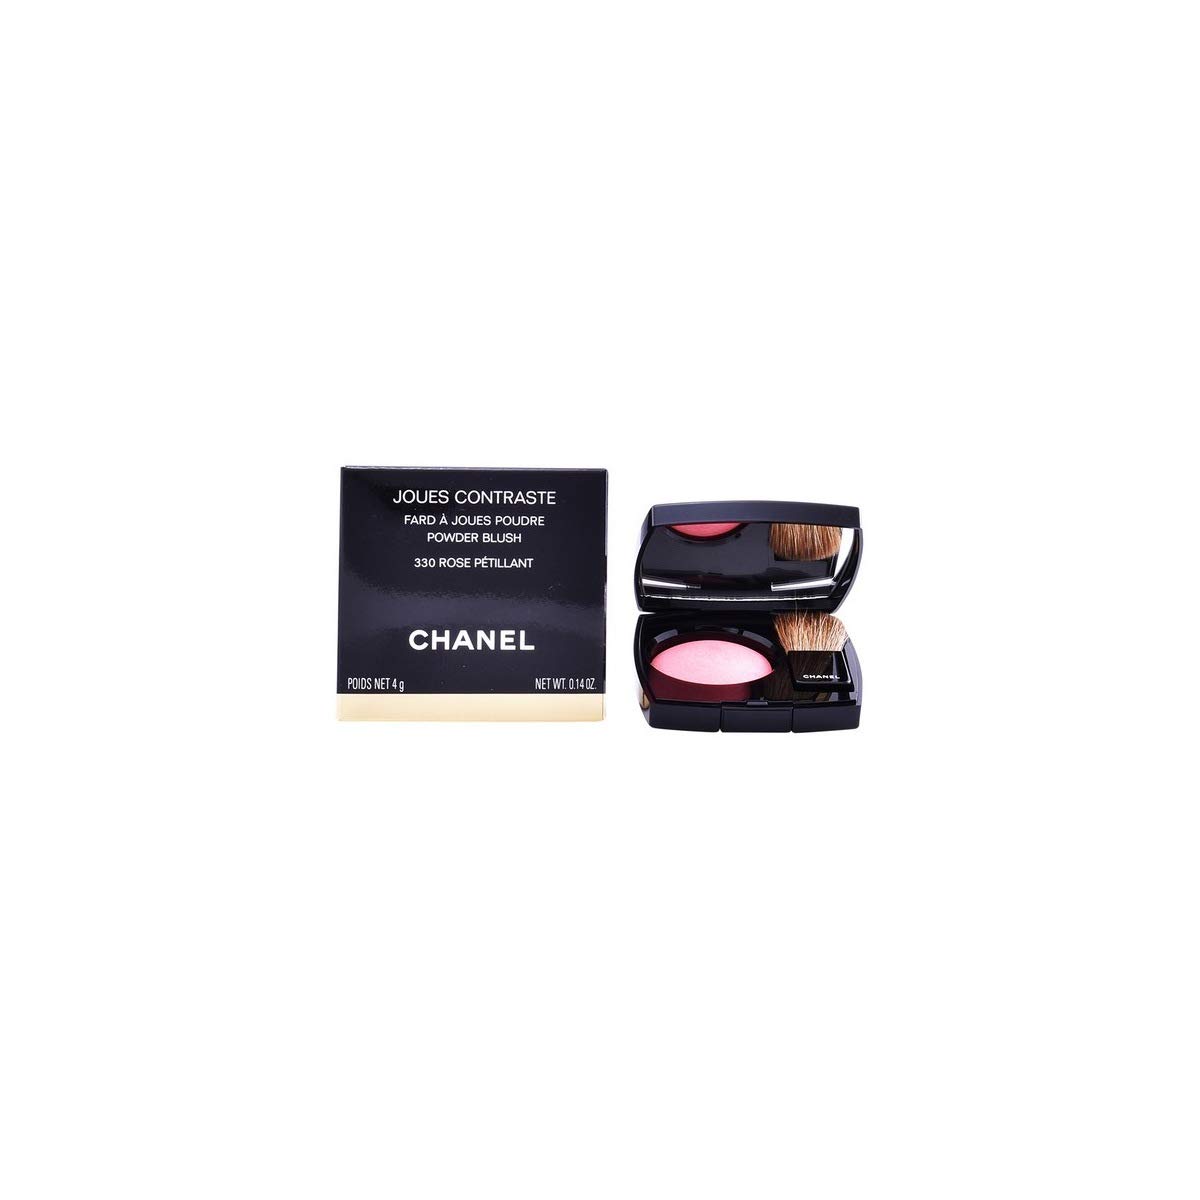 CHANEL Blusher No 21 8 gm  Buy Online at Best Price in KSA  Souq is now  Amazonsa Beauty